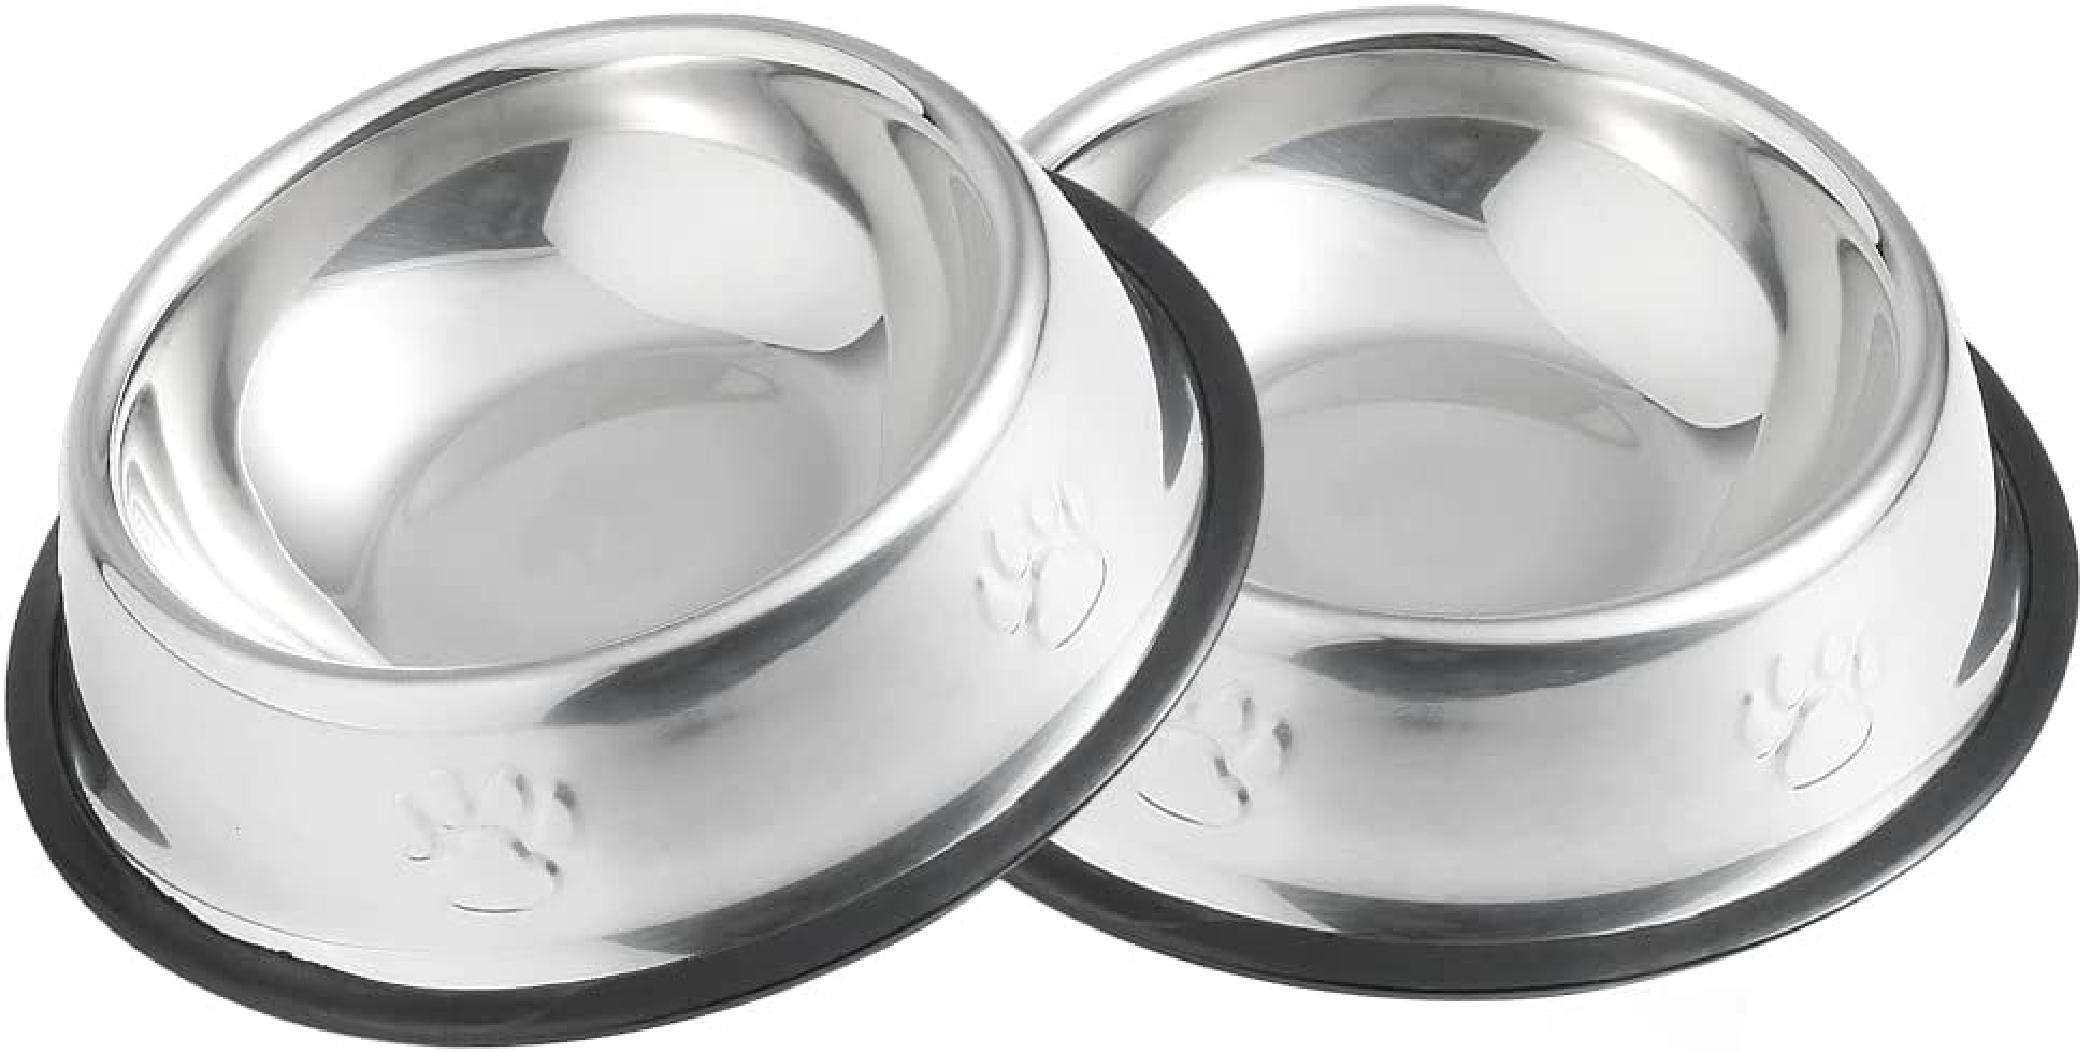 Orchids Aquae Cat Bowls Stainless Steel Dog Bowls With Rubber Base